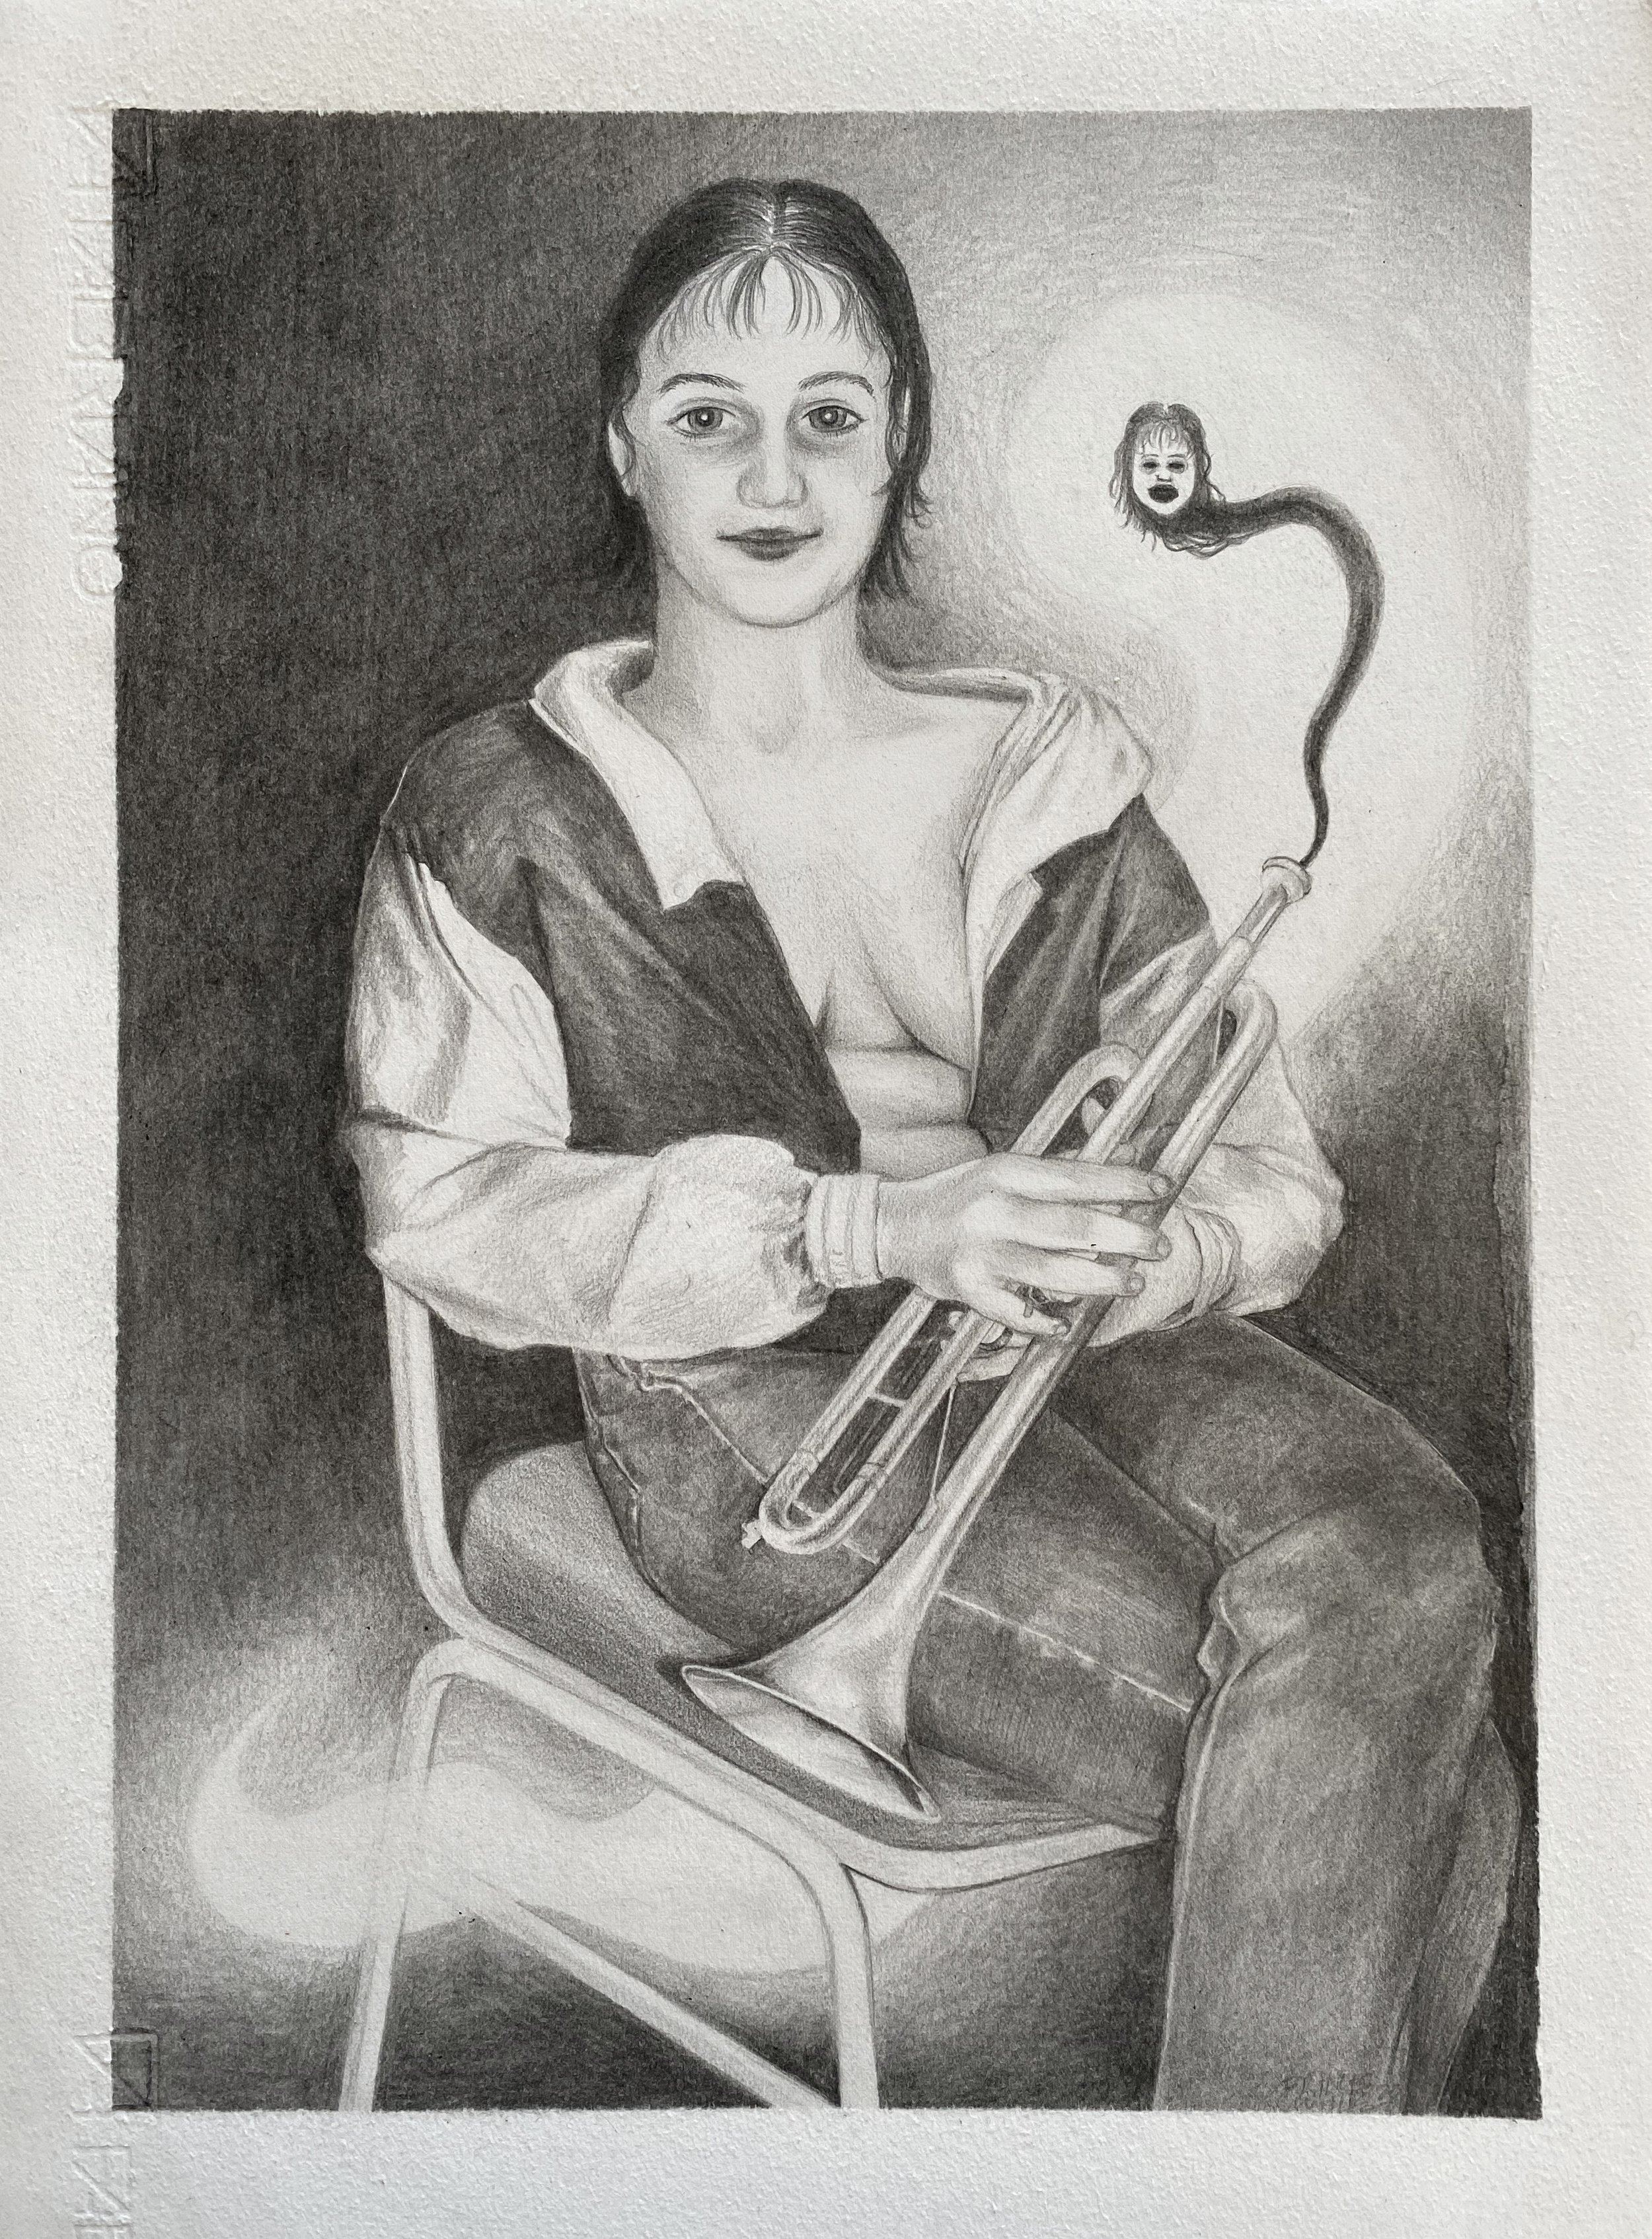 horn player with baggage_frances waite_2021.jpg